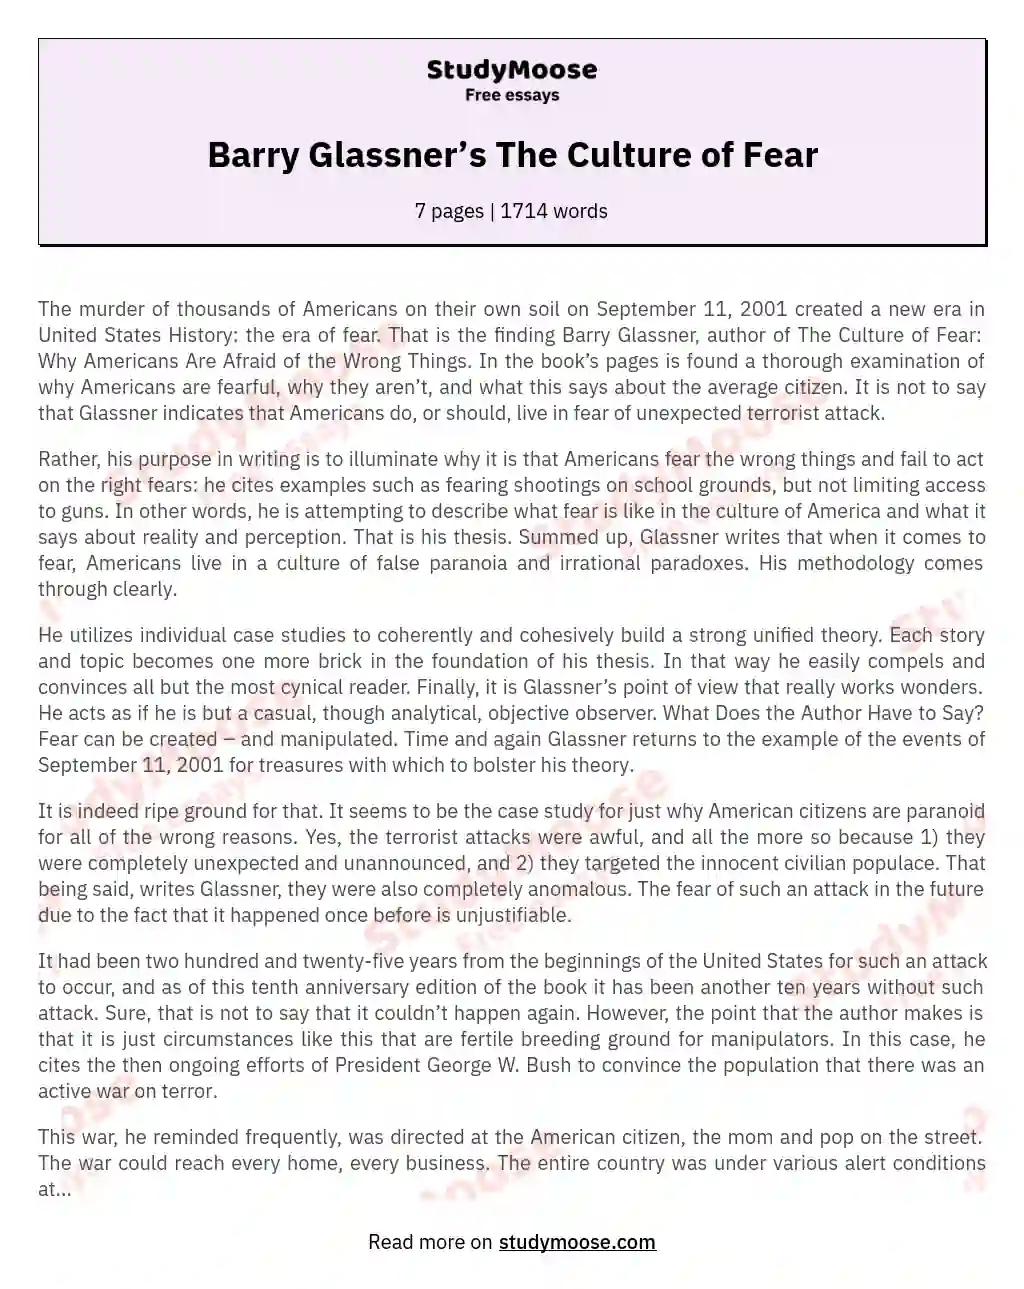 Barry Glassner’s The Culture of Fear essay